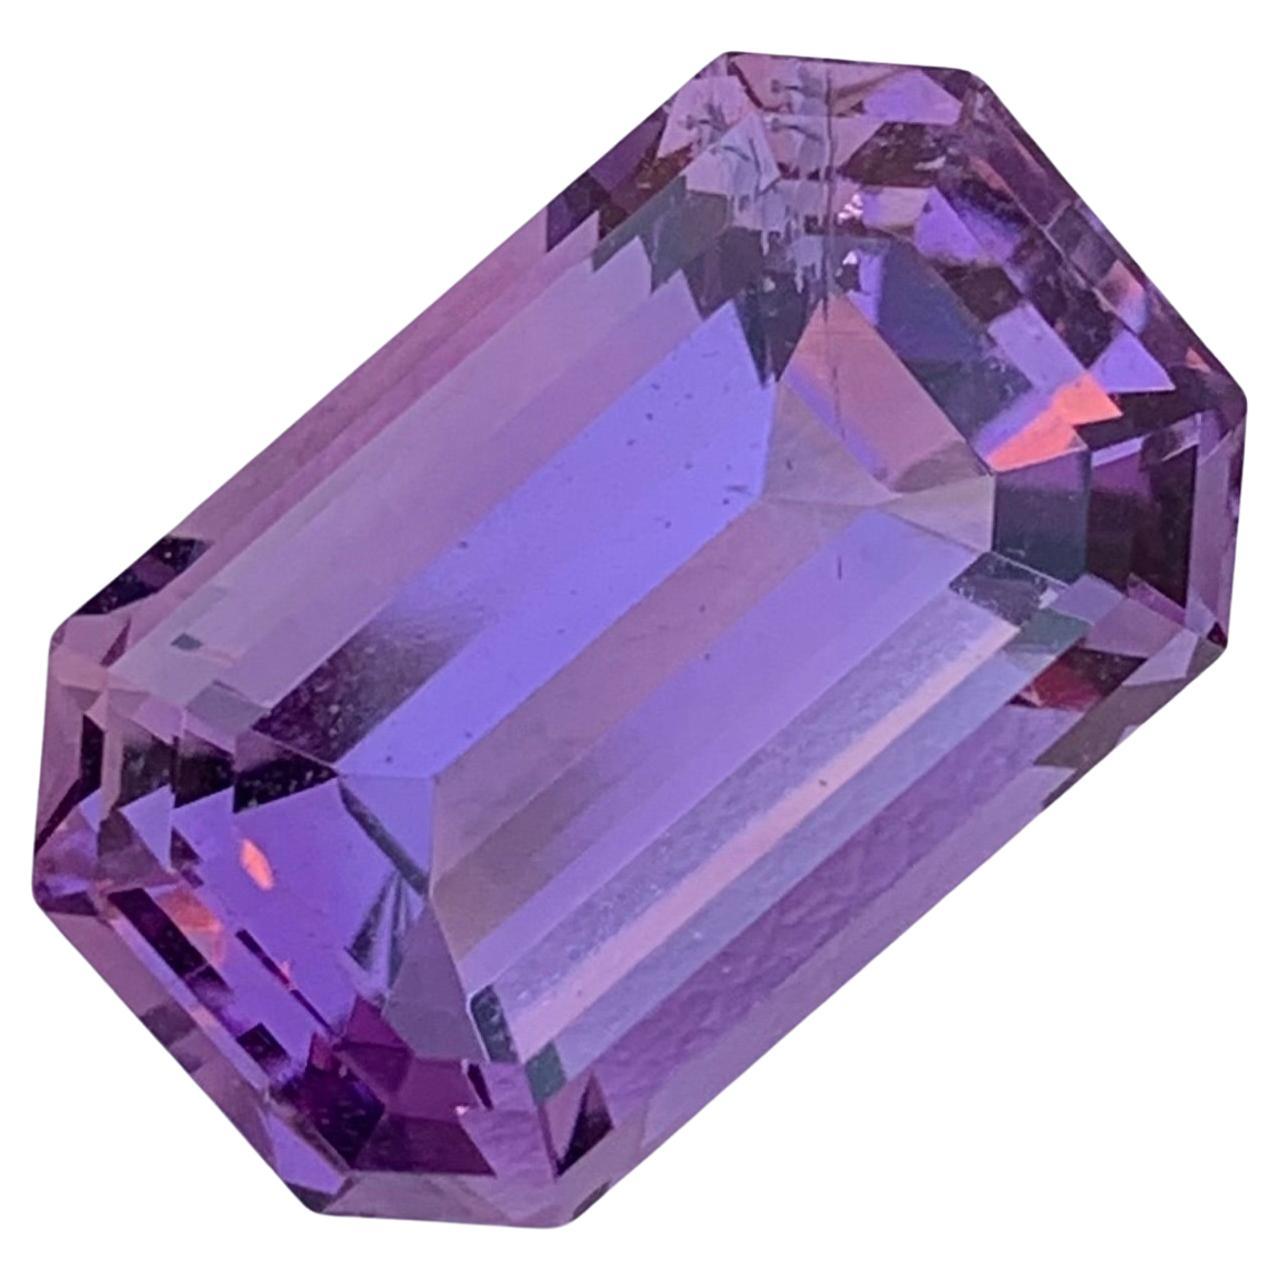 What is amethyst used for jewelry?